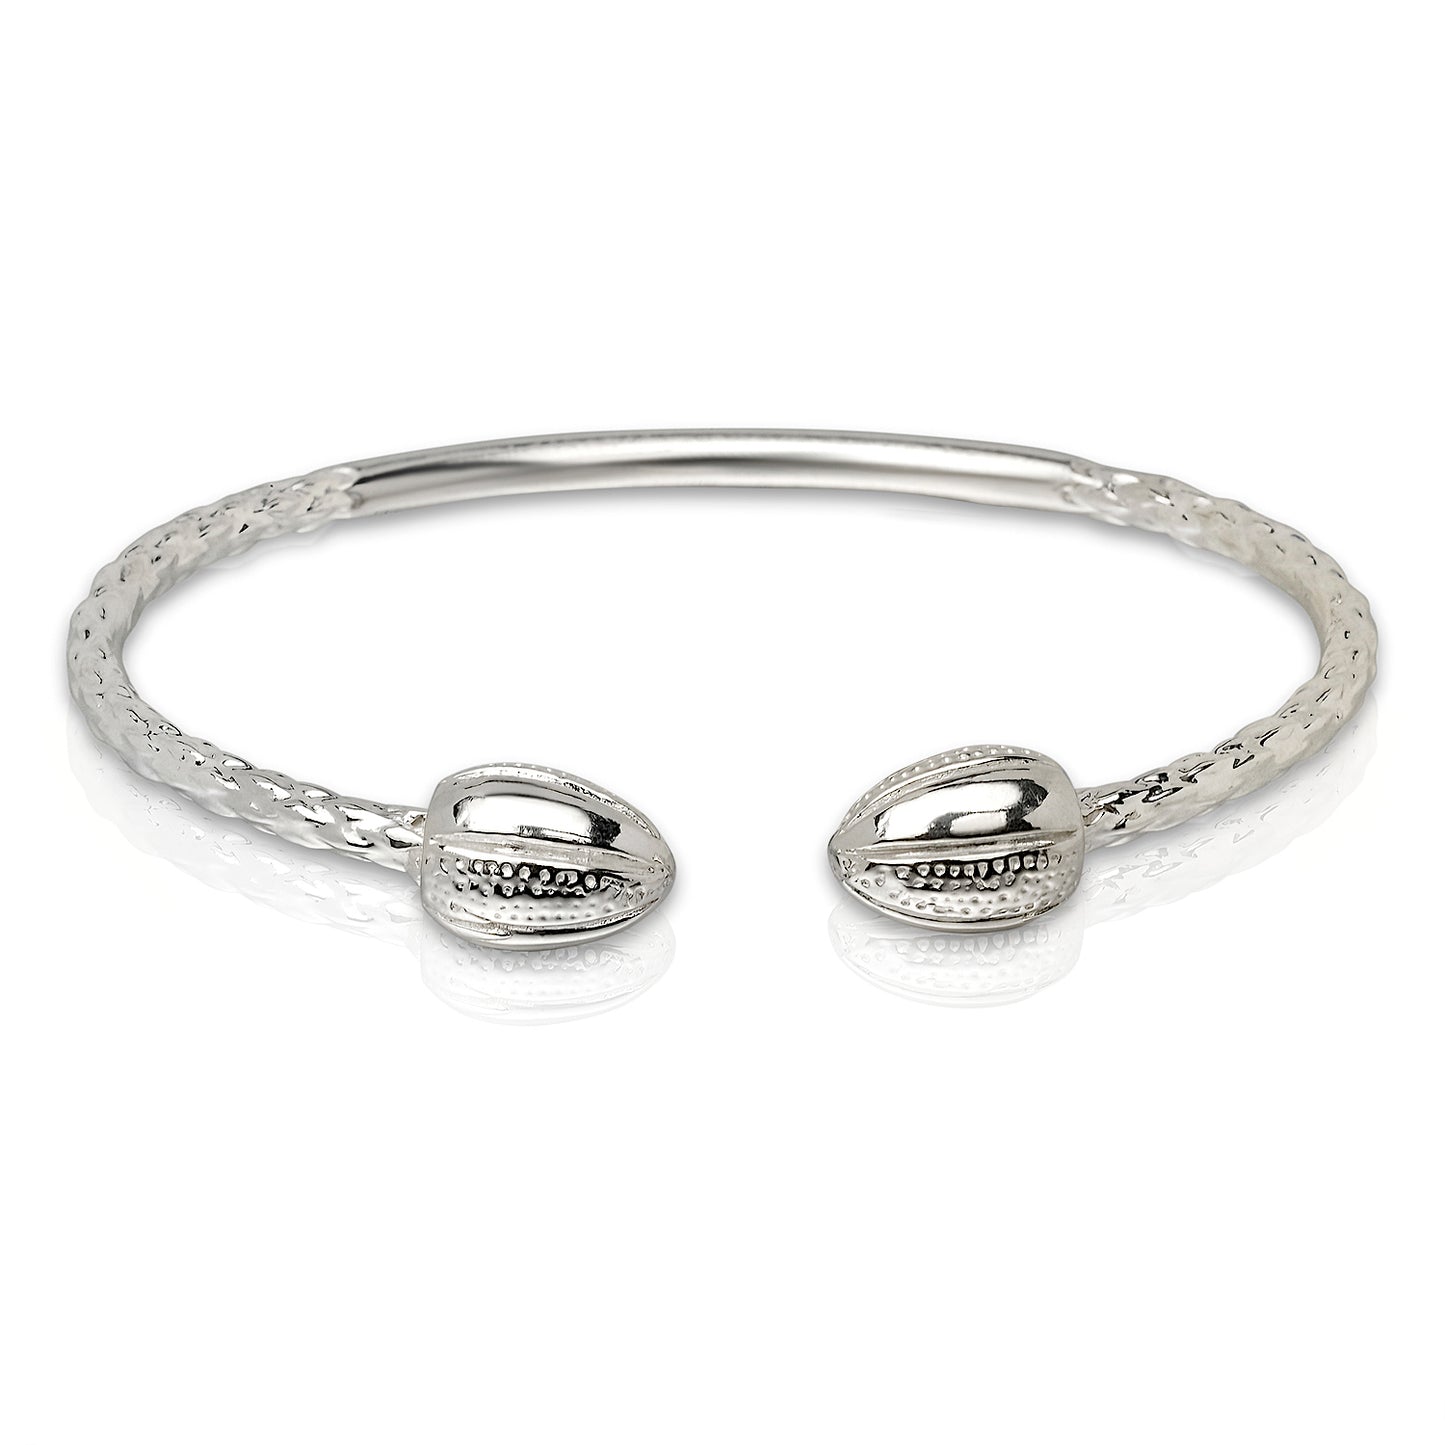 Better Jewelry Cocoa Pod End .925 Sterling Silver West Indian Bangle (Made in USA) (1 piece)